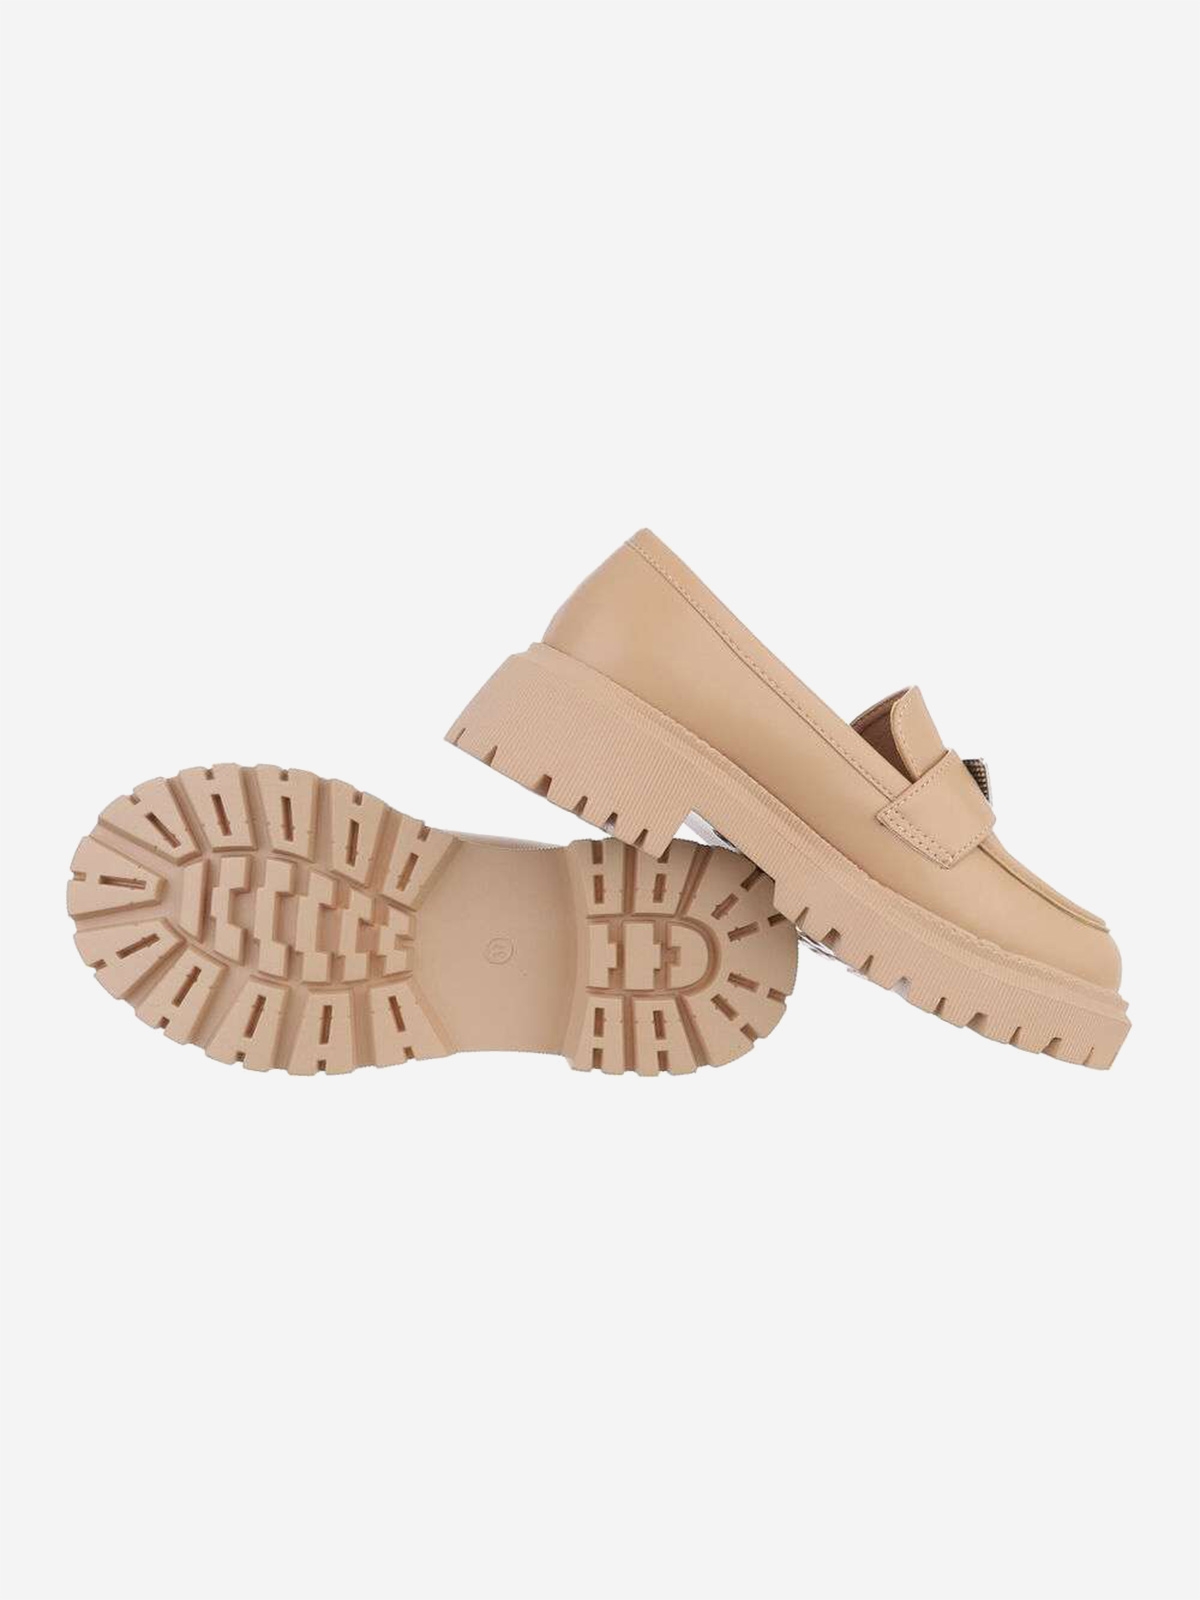 Women's loafers in beige with a decorative accent on the front